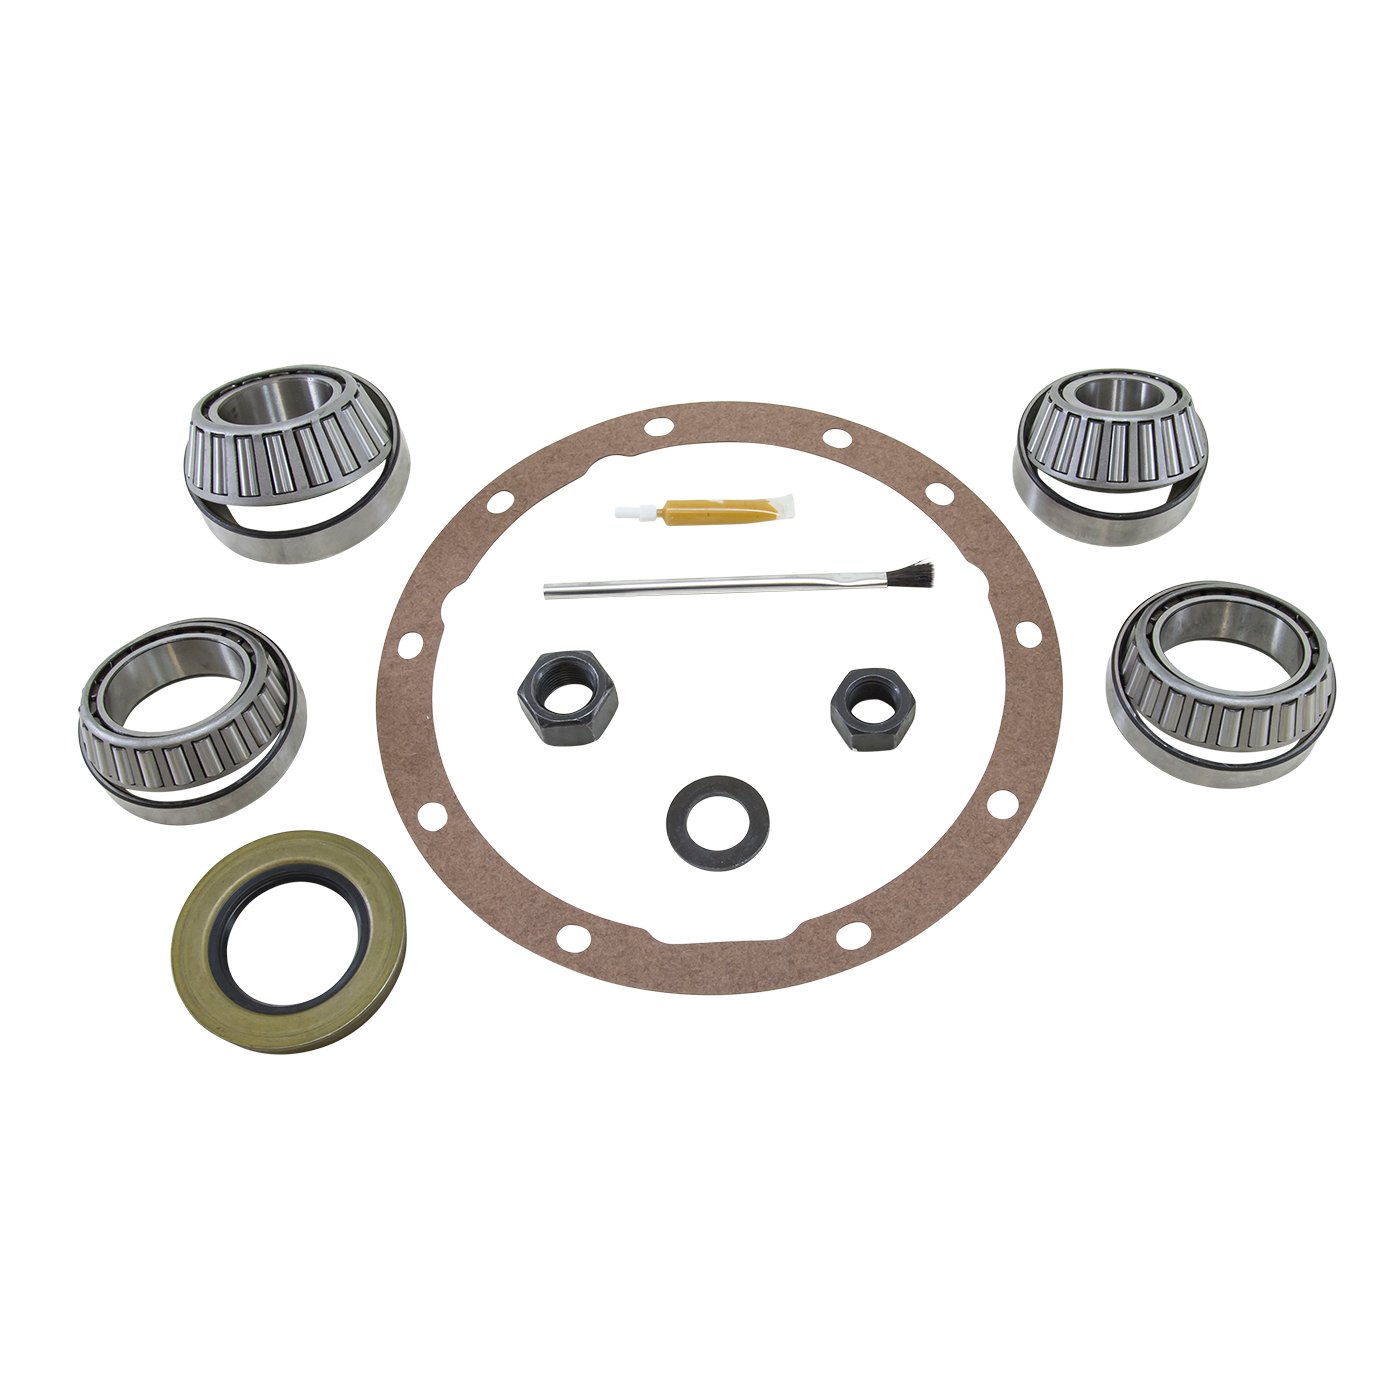 Bearing Install Kit For Chrysler 8.75 in. Four Pinion (#89) Differential